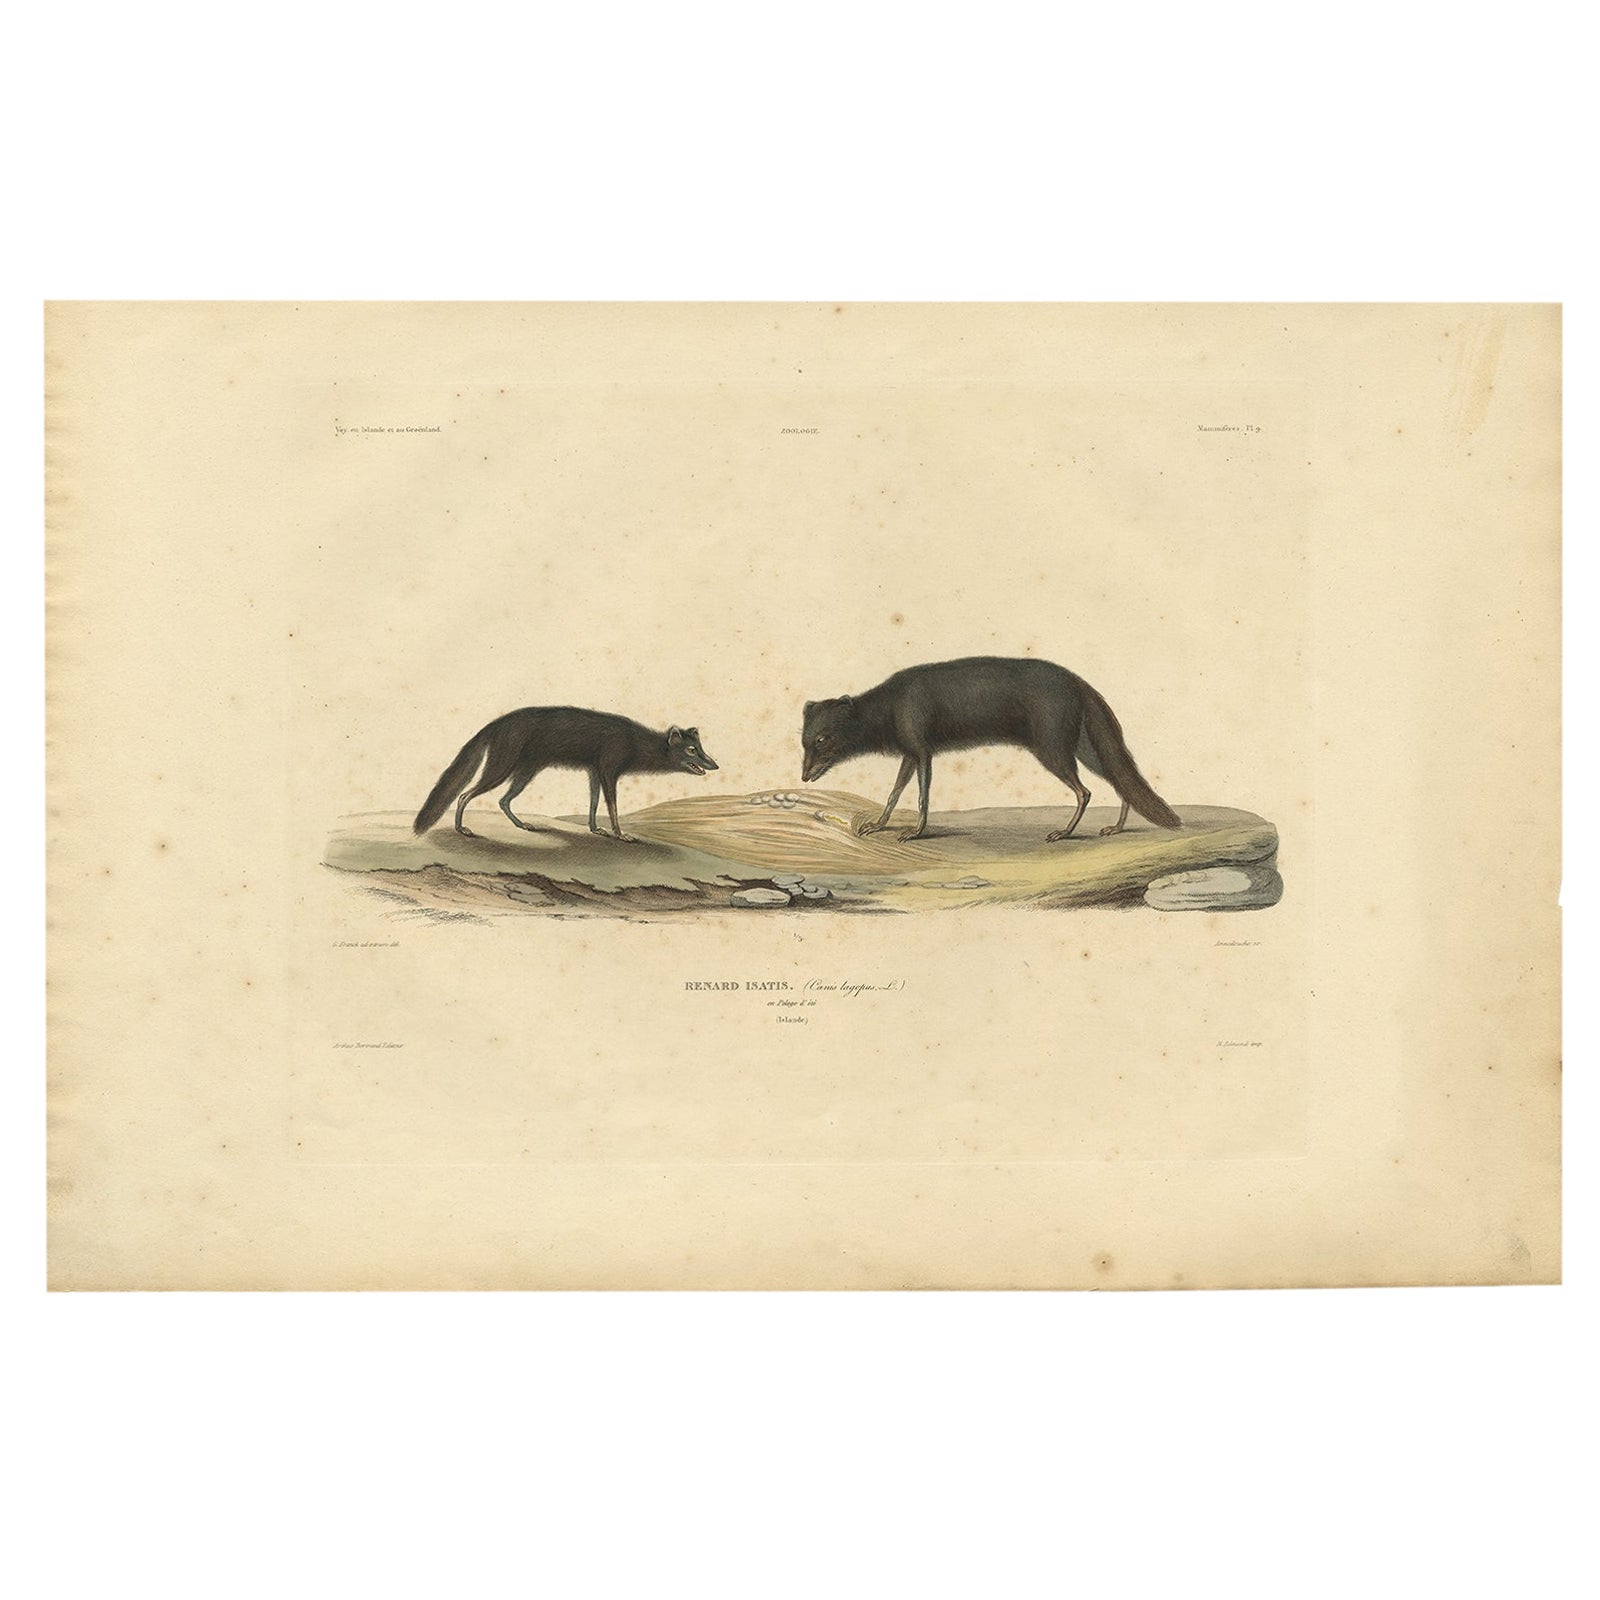 Rare Hand-Colored Engraving of An Artic Fox in Summer Coat, 1842